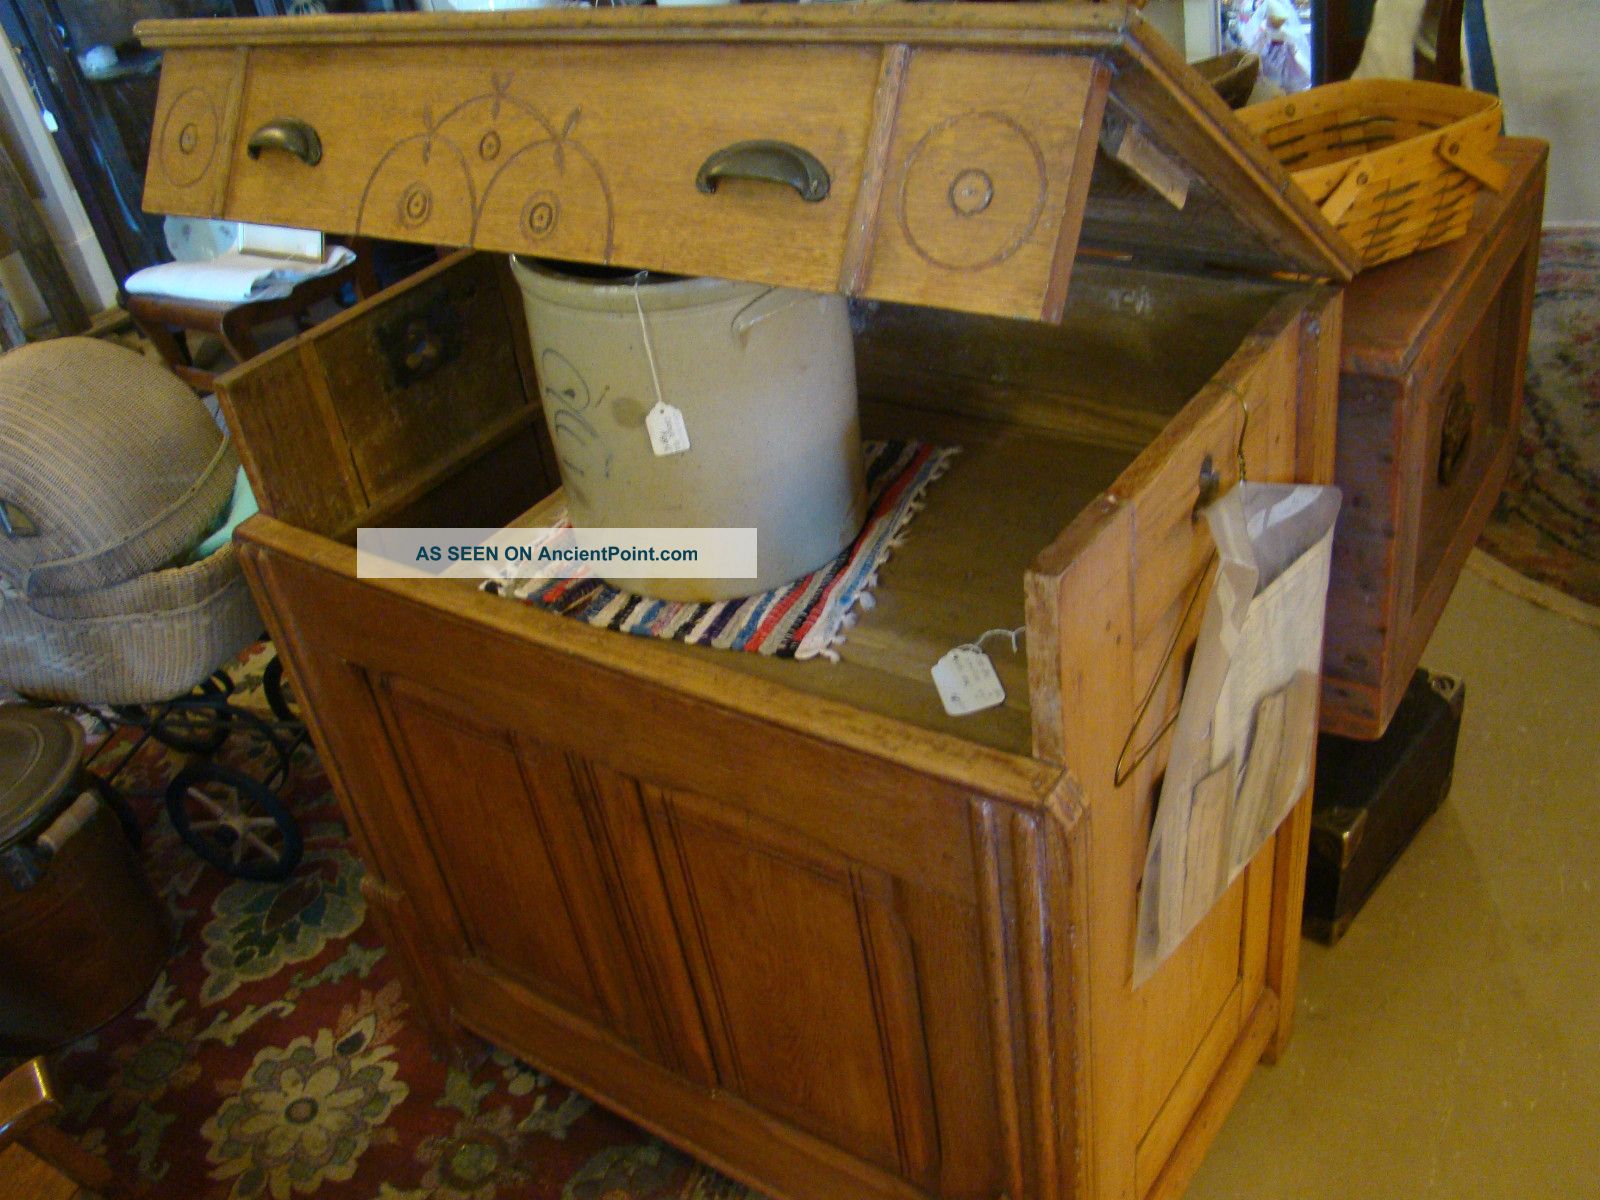 Solid Oak Storage Cabinet - Possible Grain - I Would Be Great For Fireplace Wood 1900-1950 photo